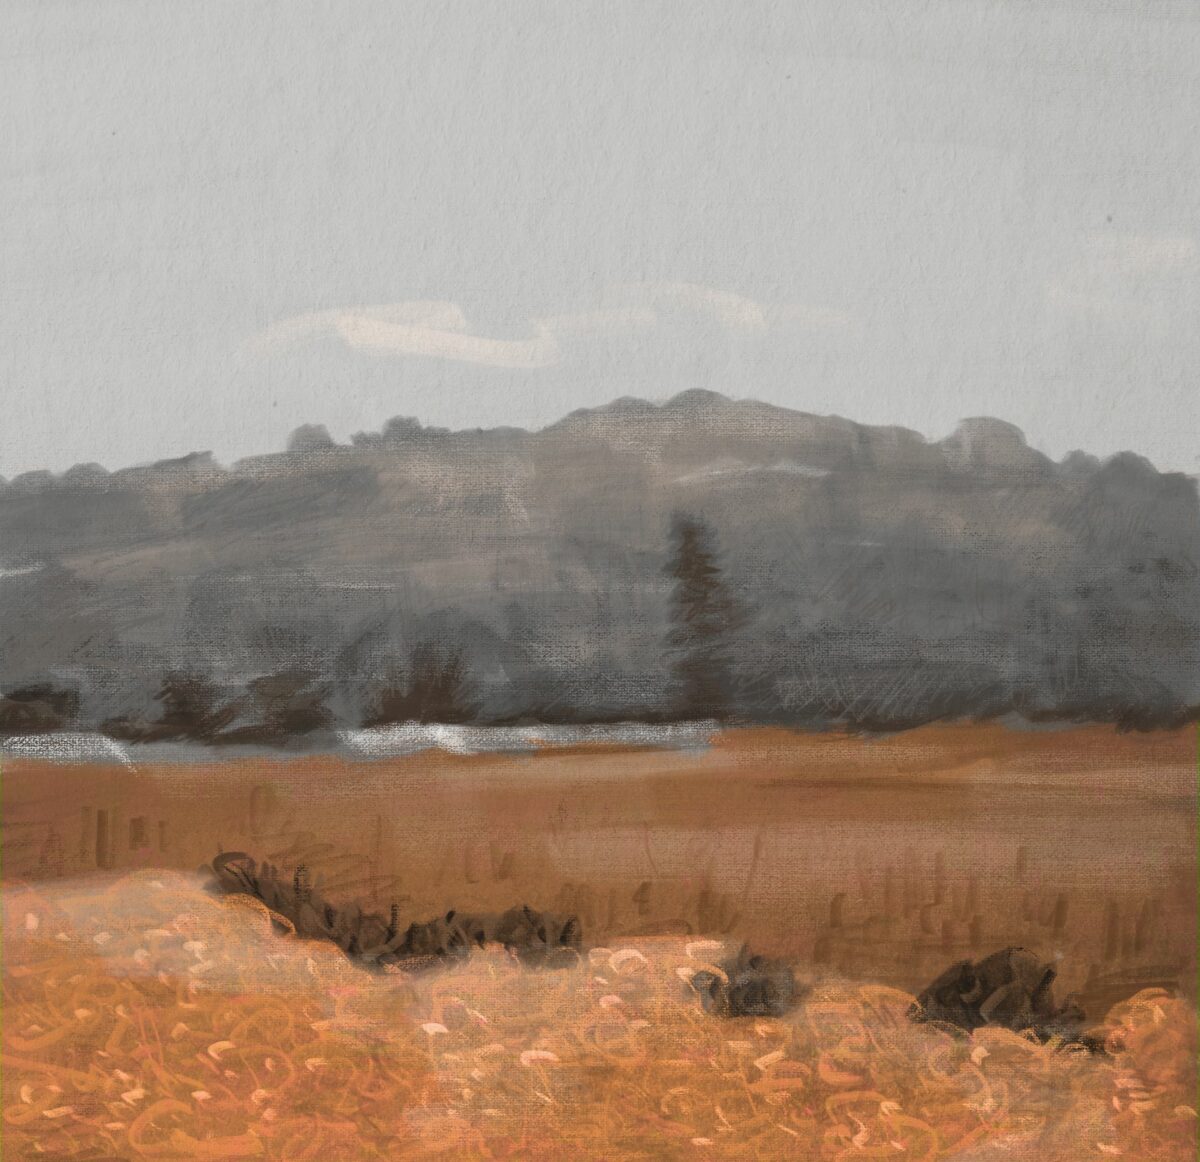 A Walk Through The Fields A Marvelous Digital Painting Series By Veronika Stehr 10